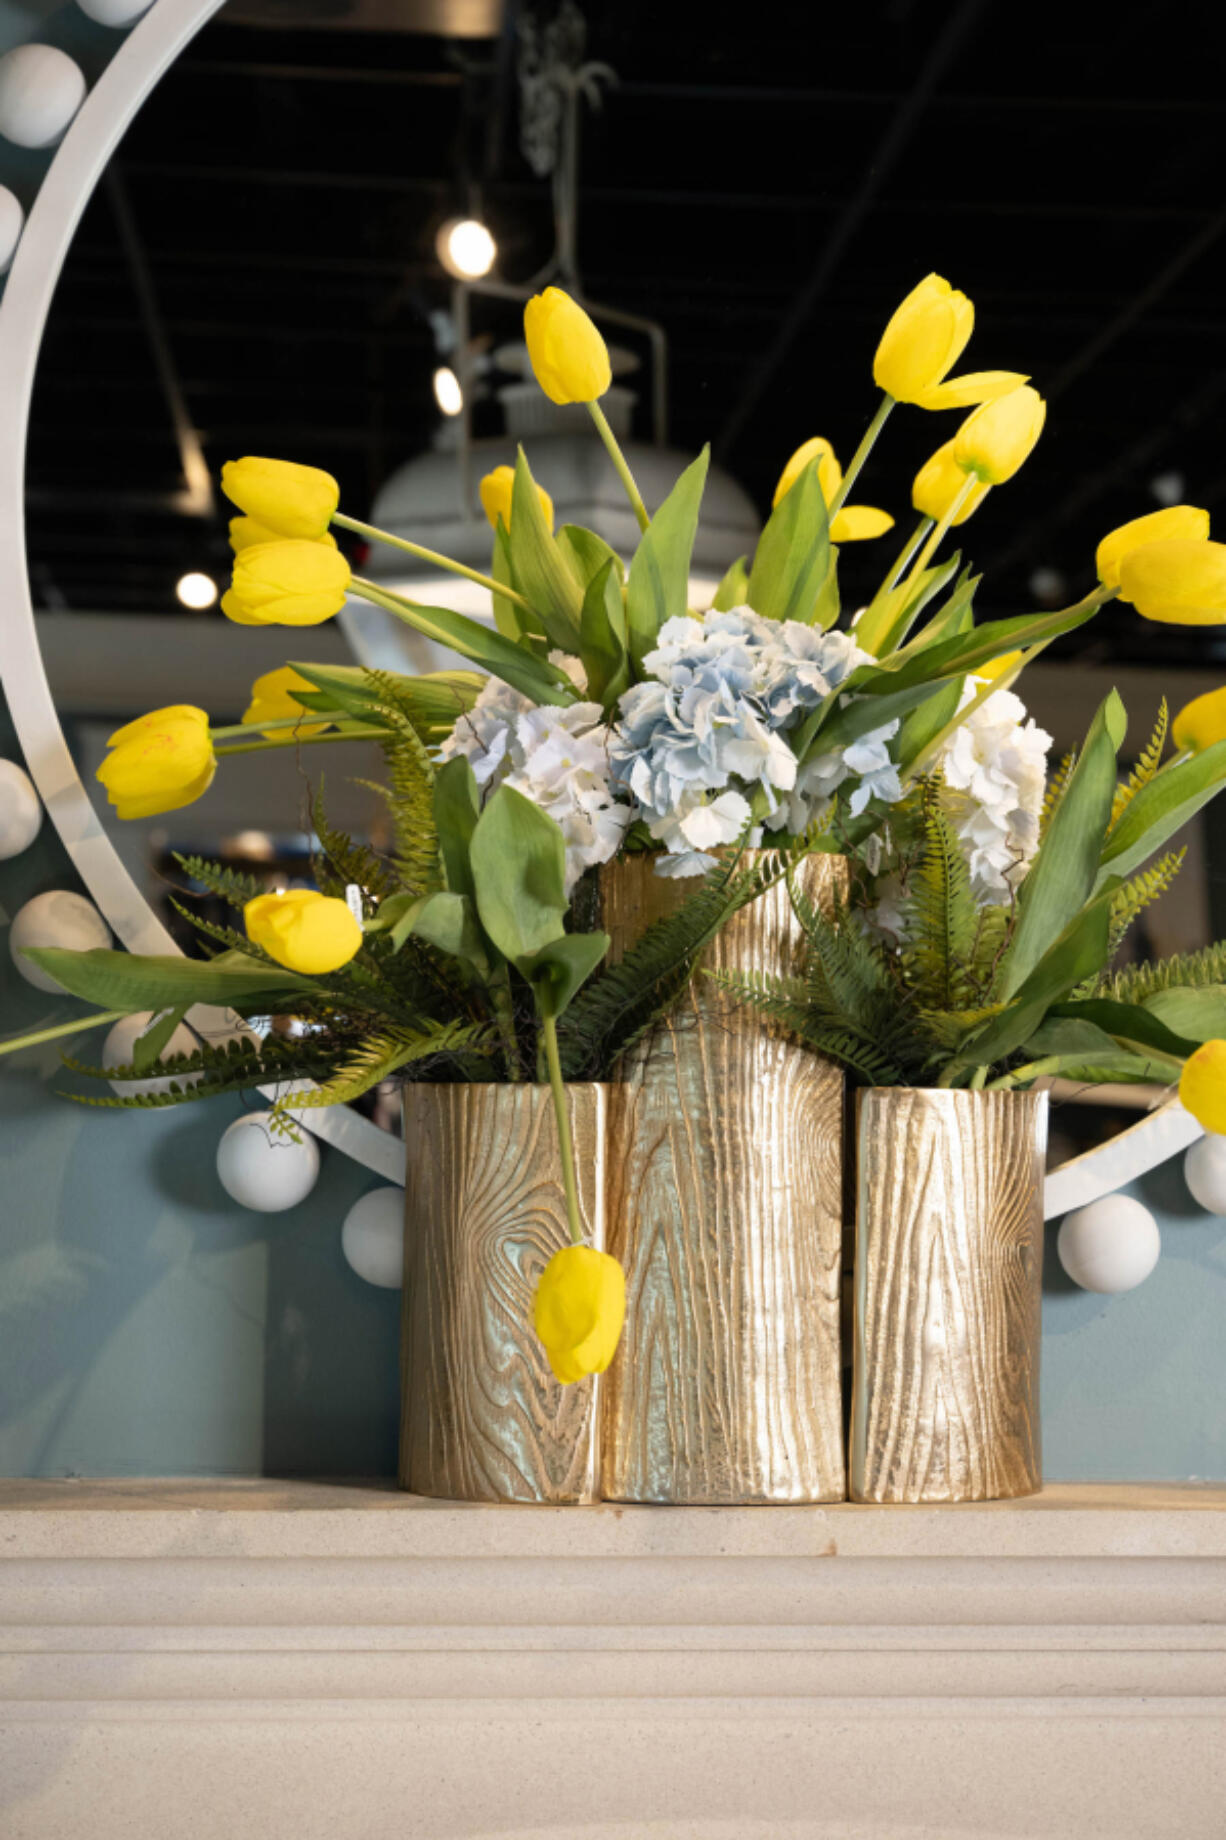 Selecting the right vessel for a floral arrangement is just as important as choosing the right stems.